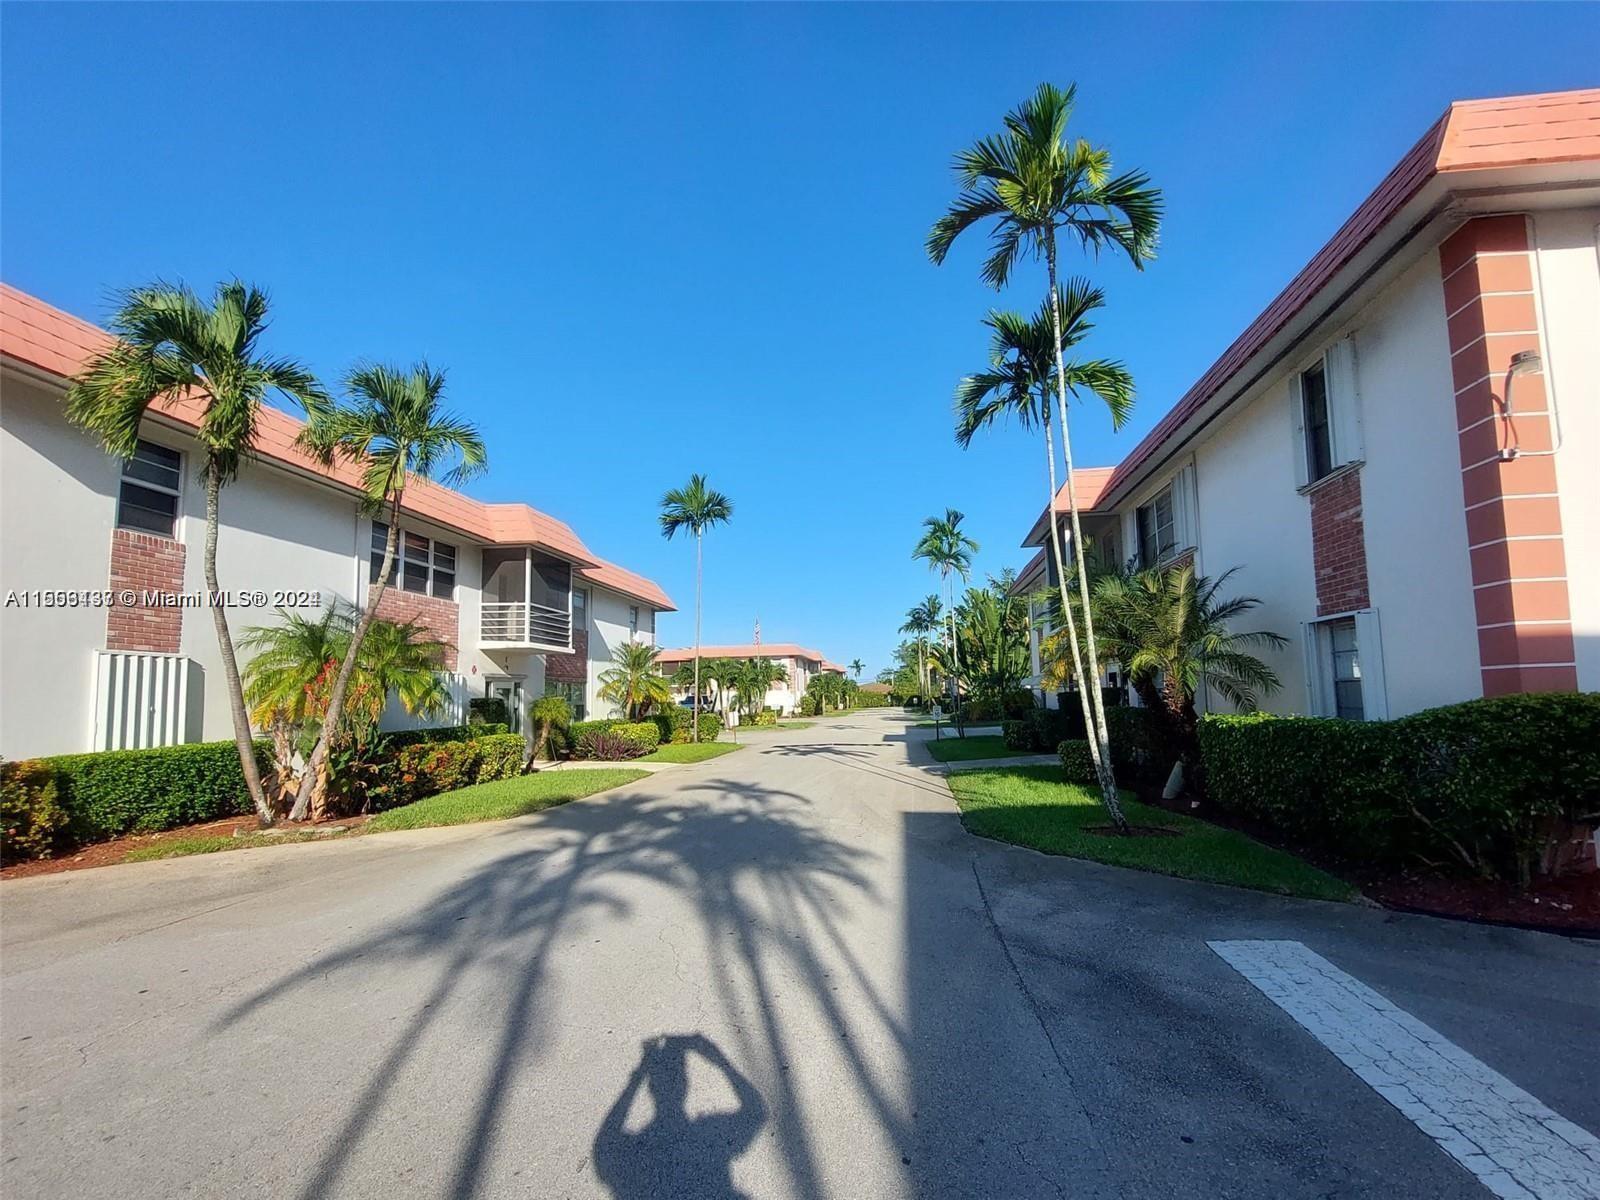 3550 NW 8th Ave 713, Pompano Beach, Florida 33064, 2 Bedrooms Bedrooms, ,1 BathroomBathrooms,Residentiallease,For Rent,3550 NW 8th Ave 713,A11553137